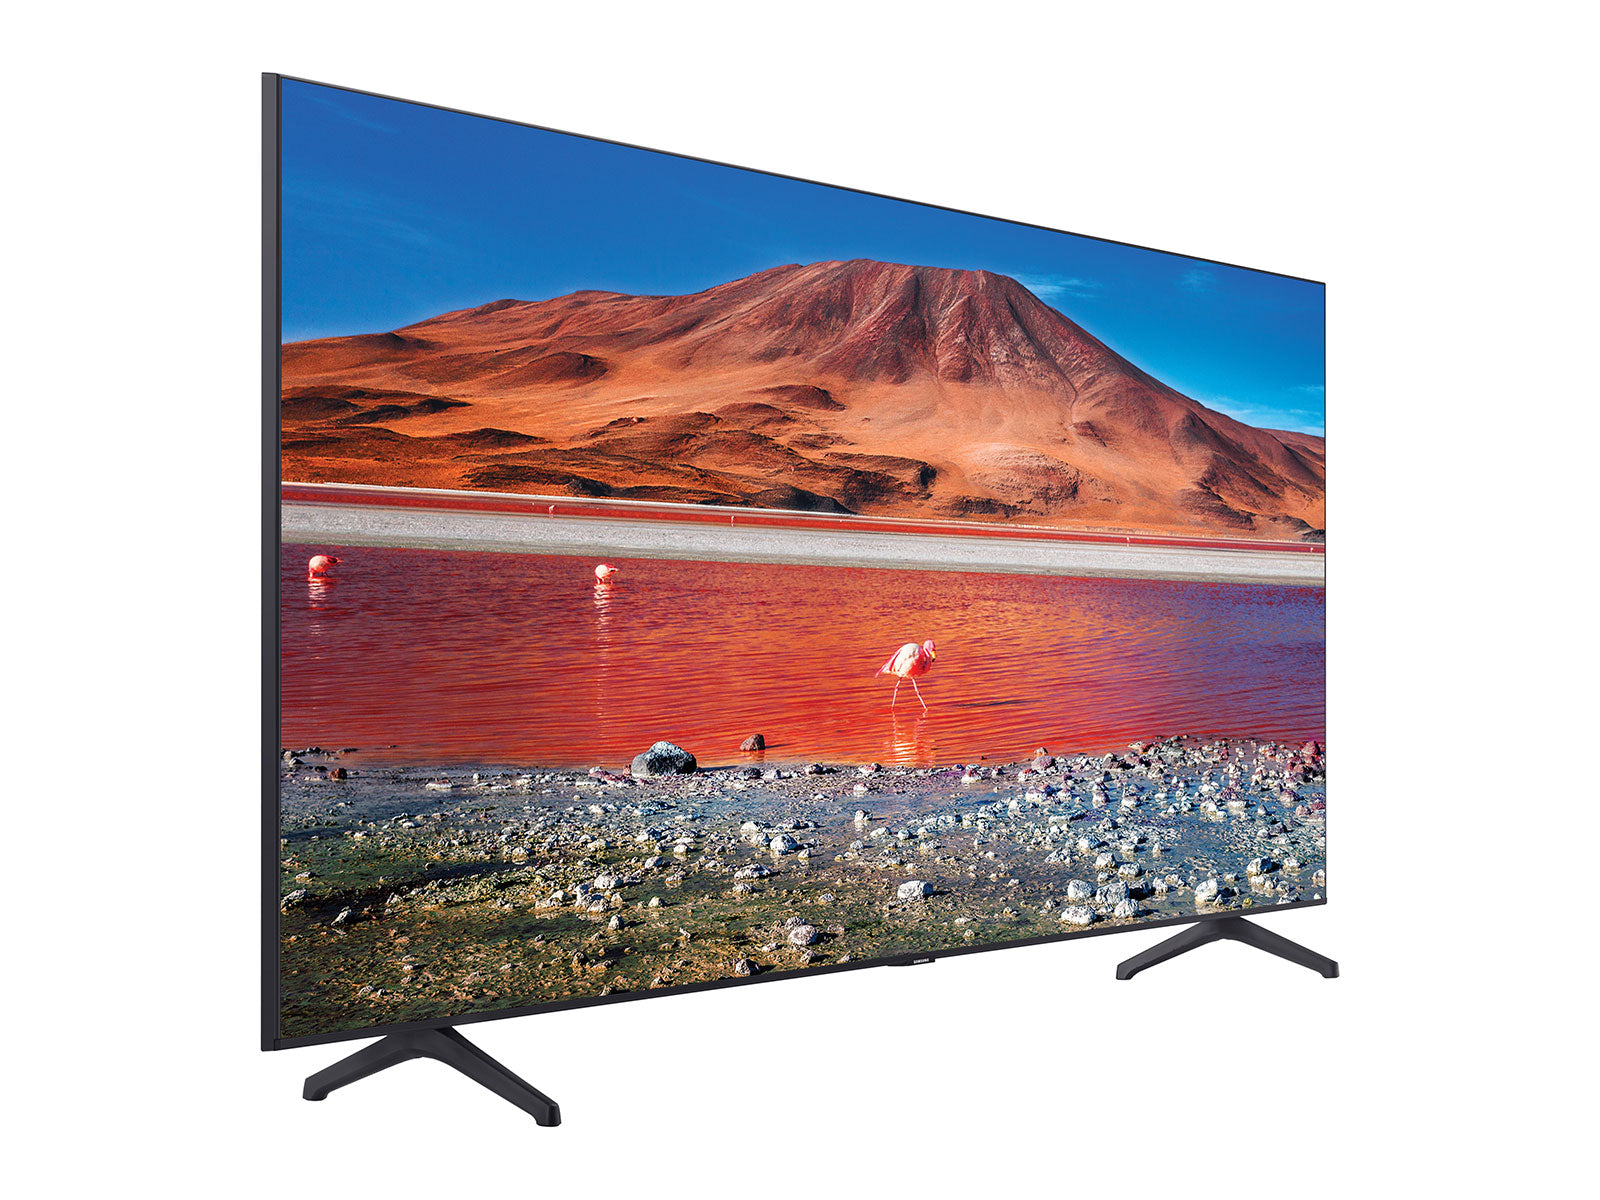 Samsung 75" Class TU700D 4K Crystal UHD HDR Smart TV(Refurbished) Tv's ONLY for delivery in San Diego and Tijuana